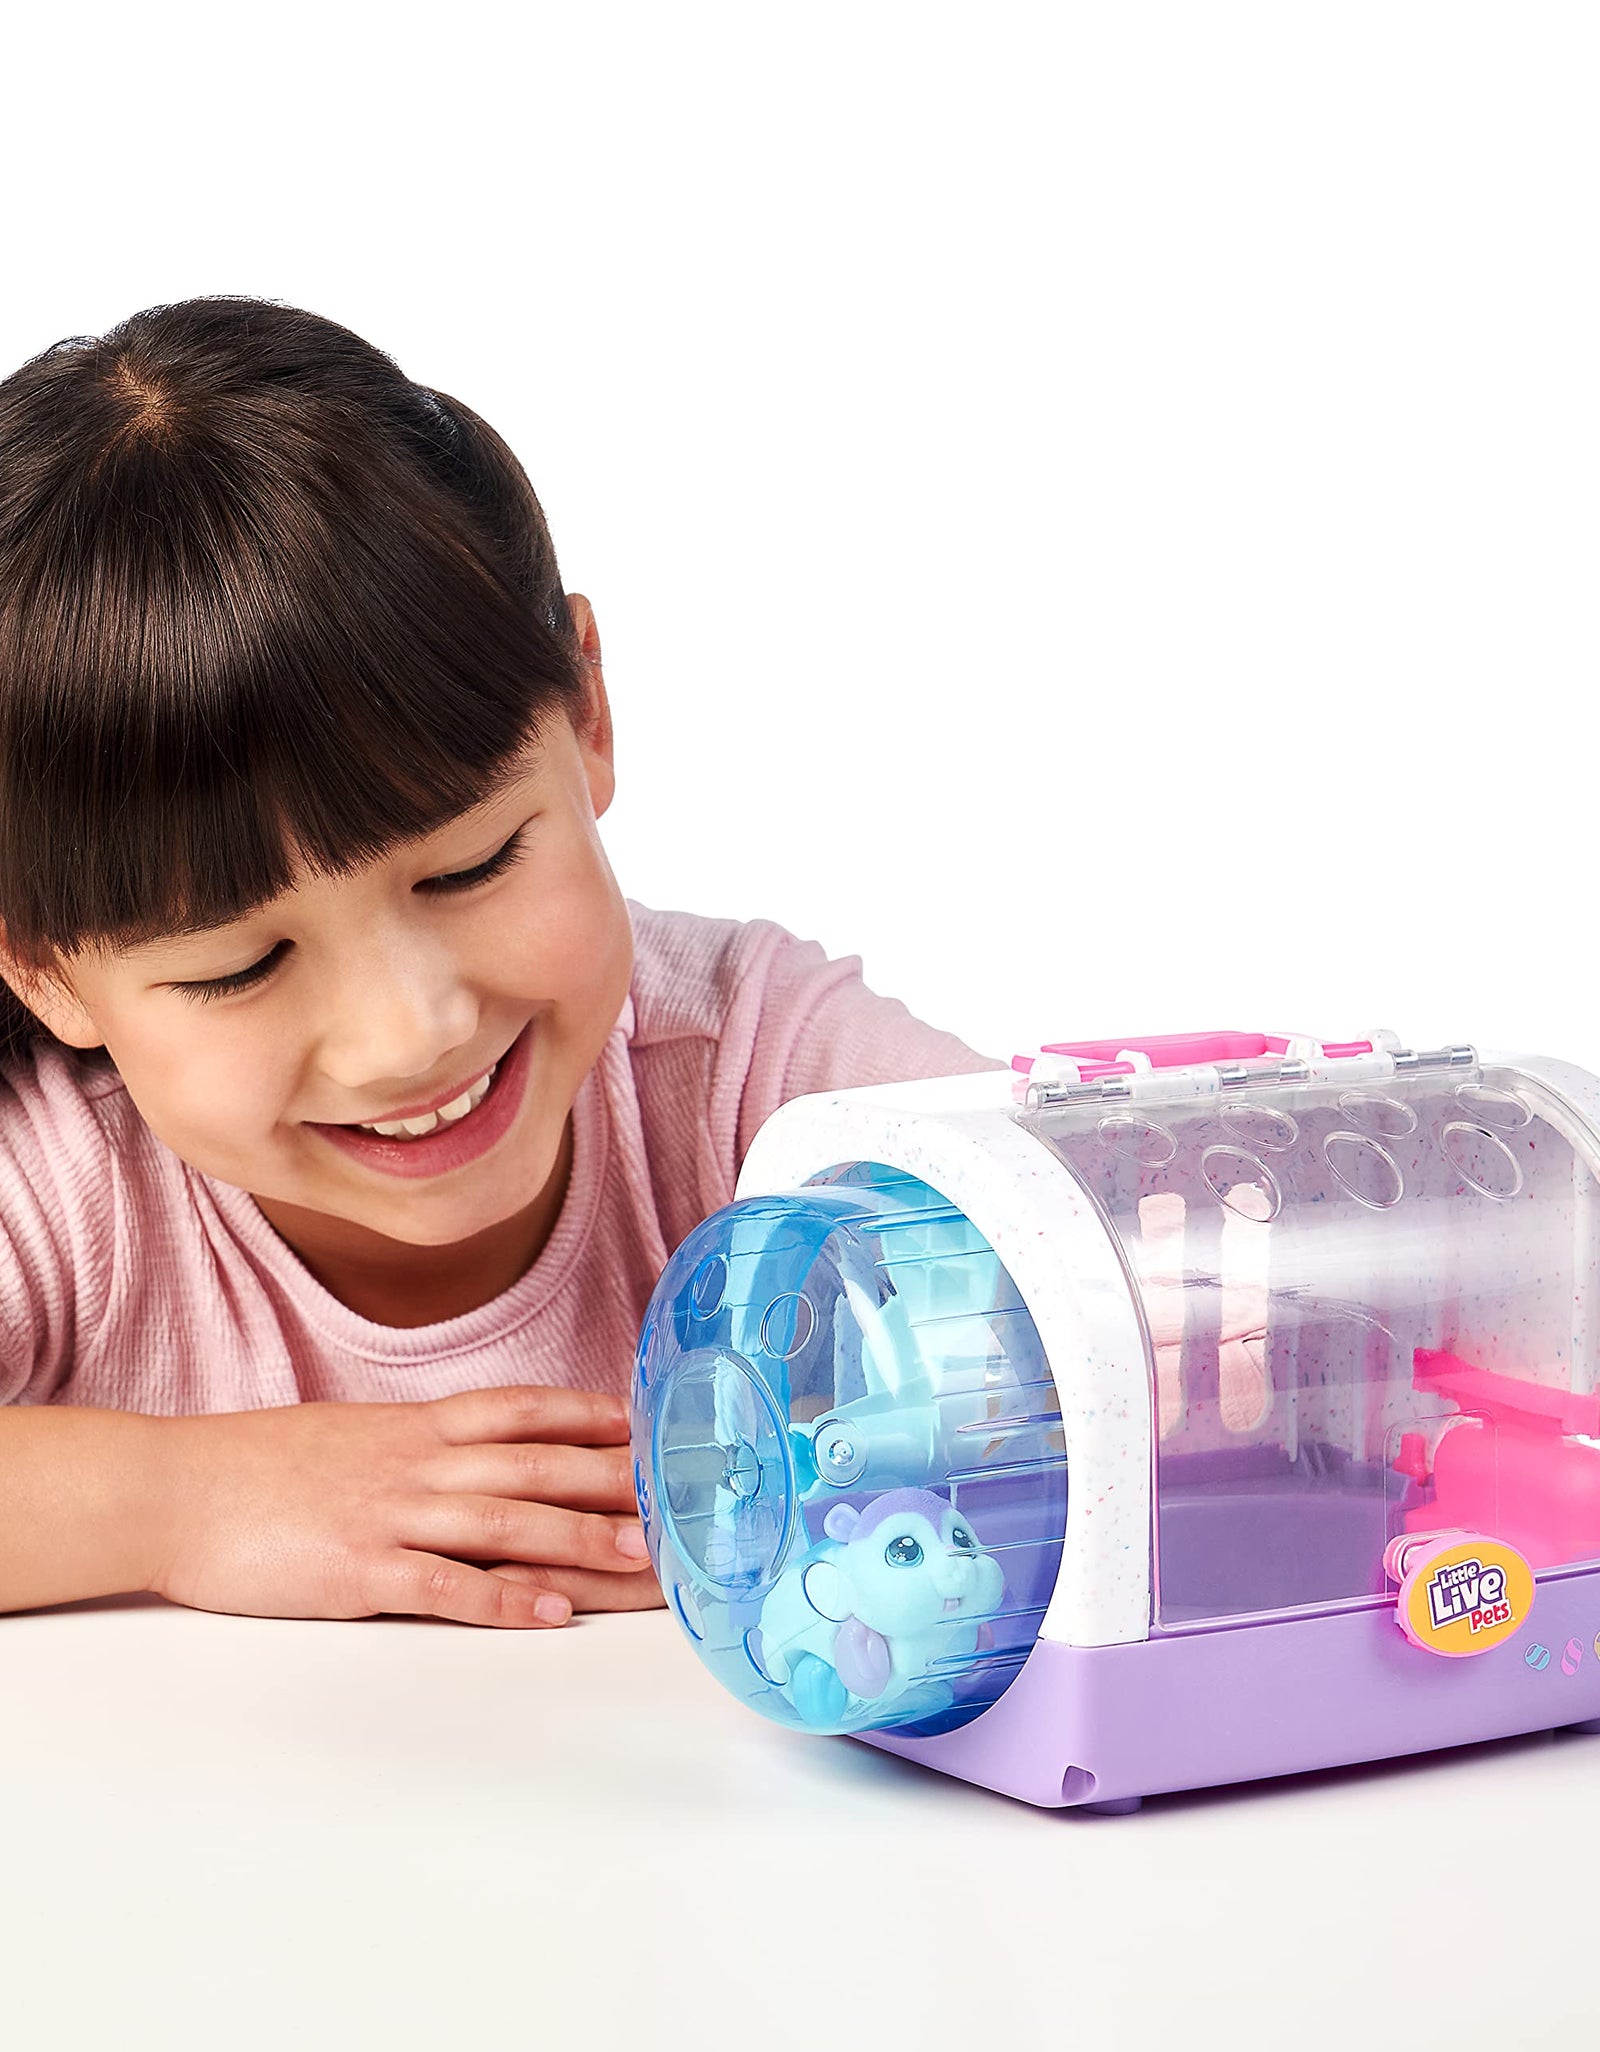 Little Live Pets - Lil' Hamster: Popmello & House Playset | Interactive Toy Hamster. Scurries, Sounds, and Moves Like a Real Hamster. Soft Flocked. Batteries Included. for Kids 4+